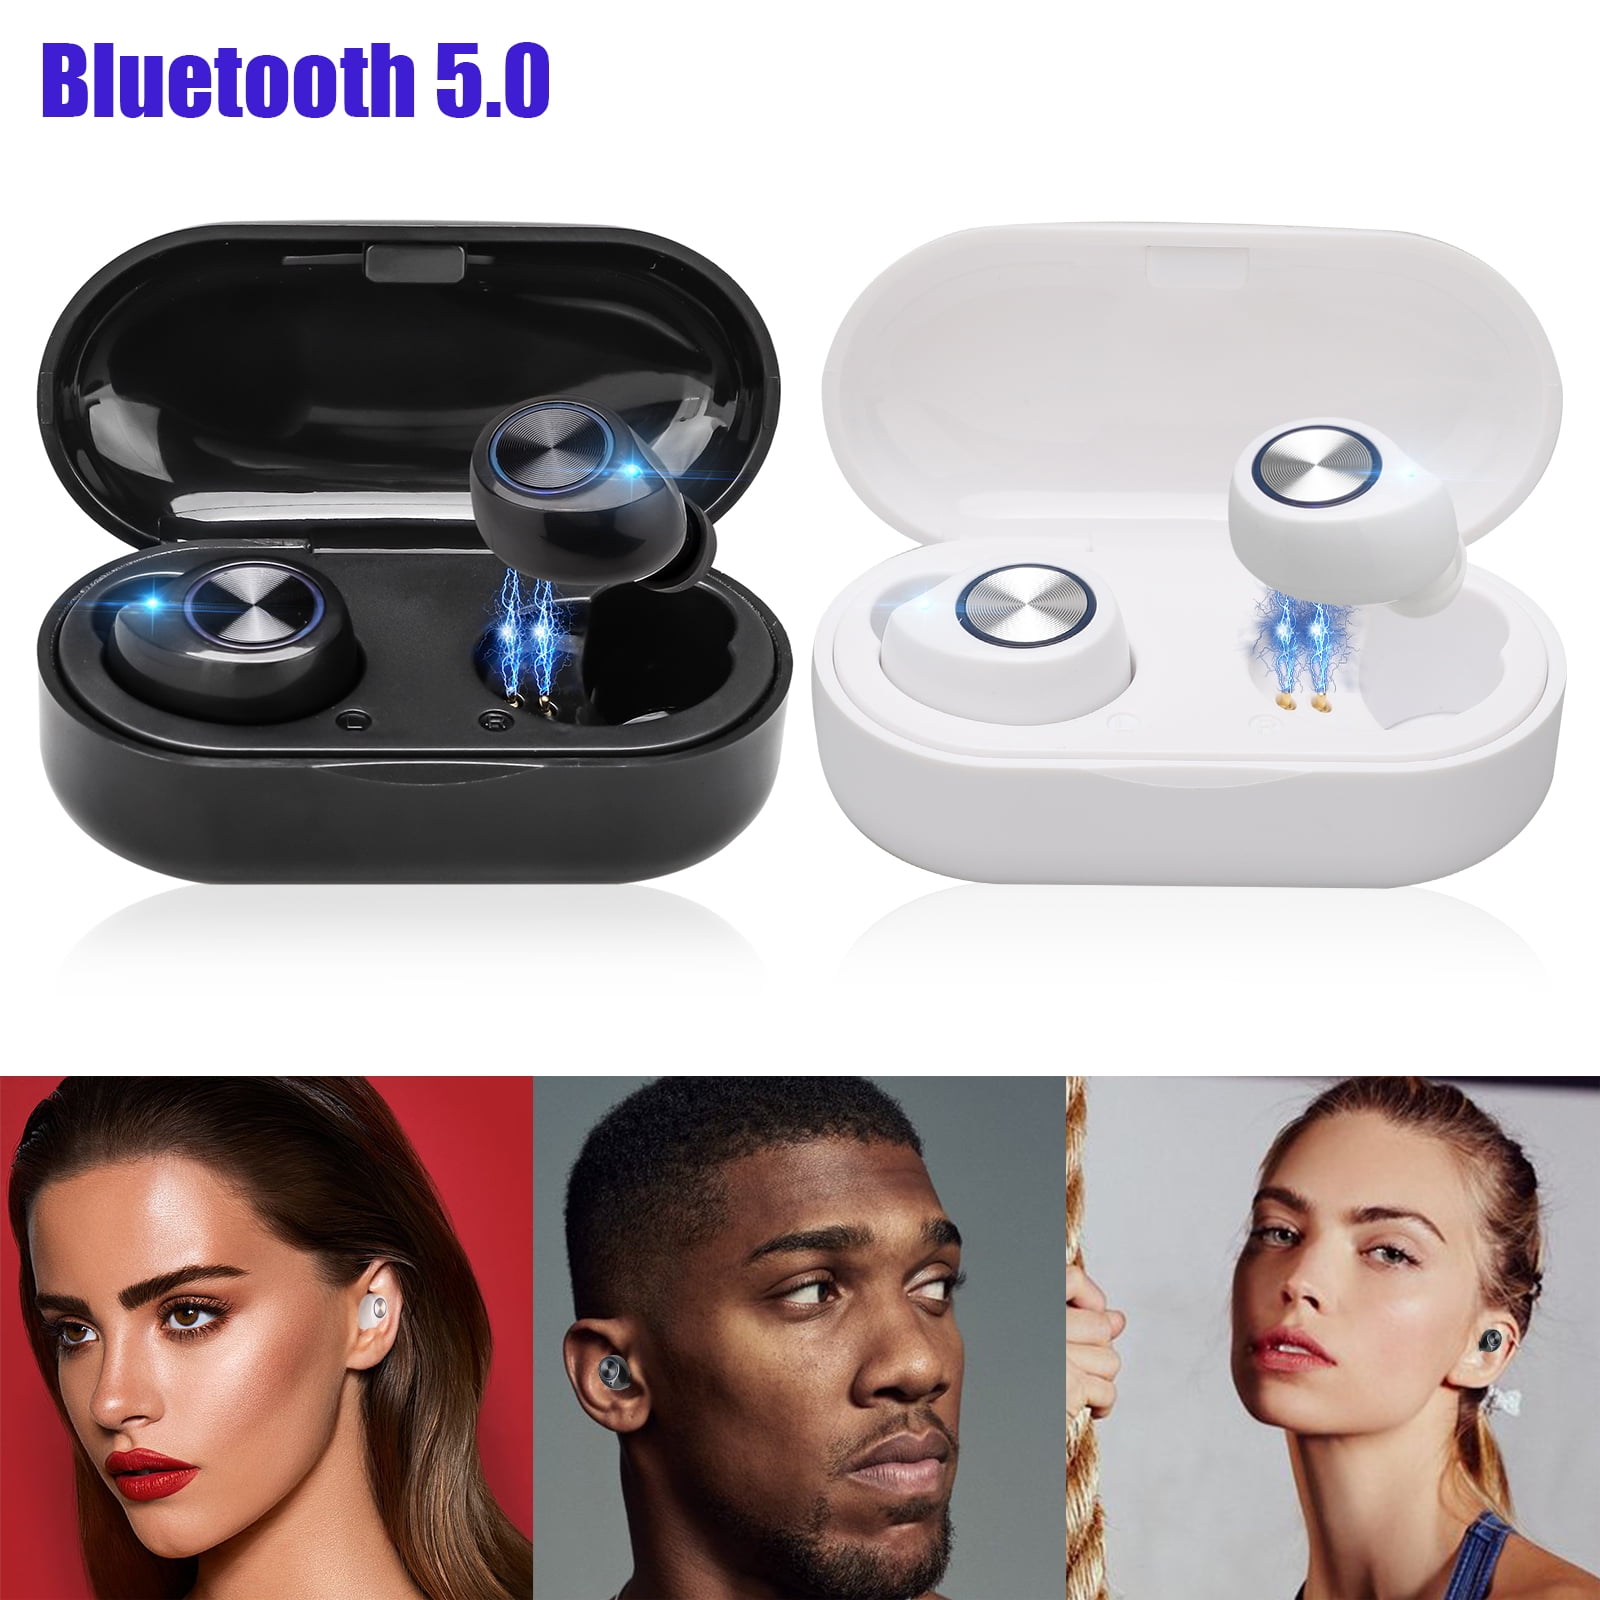 TSV 5.0 True Wireless Bluetooth Earphones, Universal Sport Earbuds with Charging Box, Waterproof Long Standby Three Modes Optional Fit for iPhone 11/11 Pro/Pro Max Samsung Galaxy S10/9/8 Plus Huawei